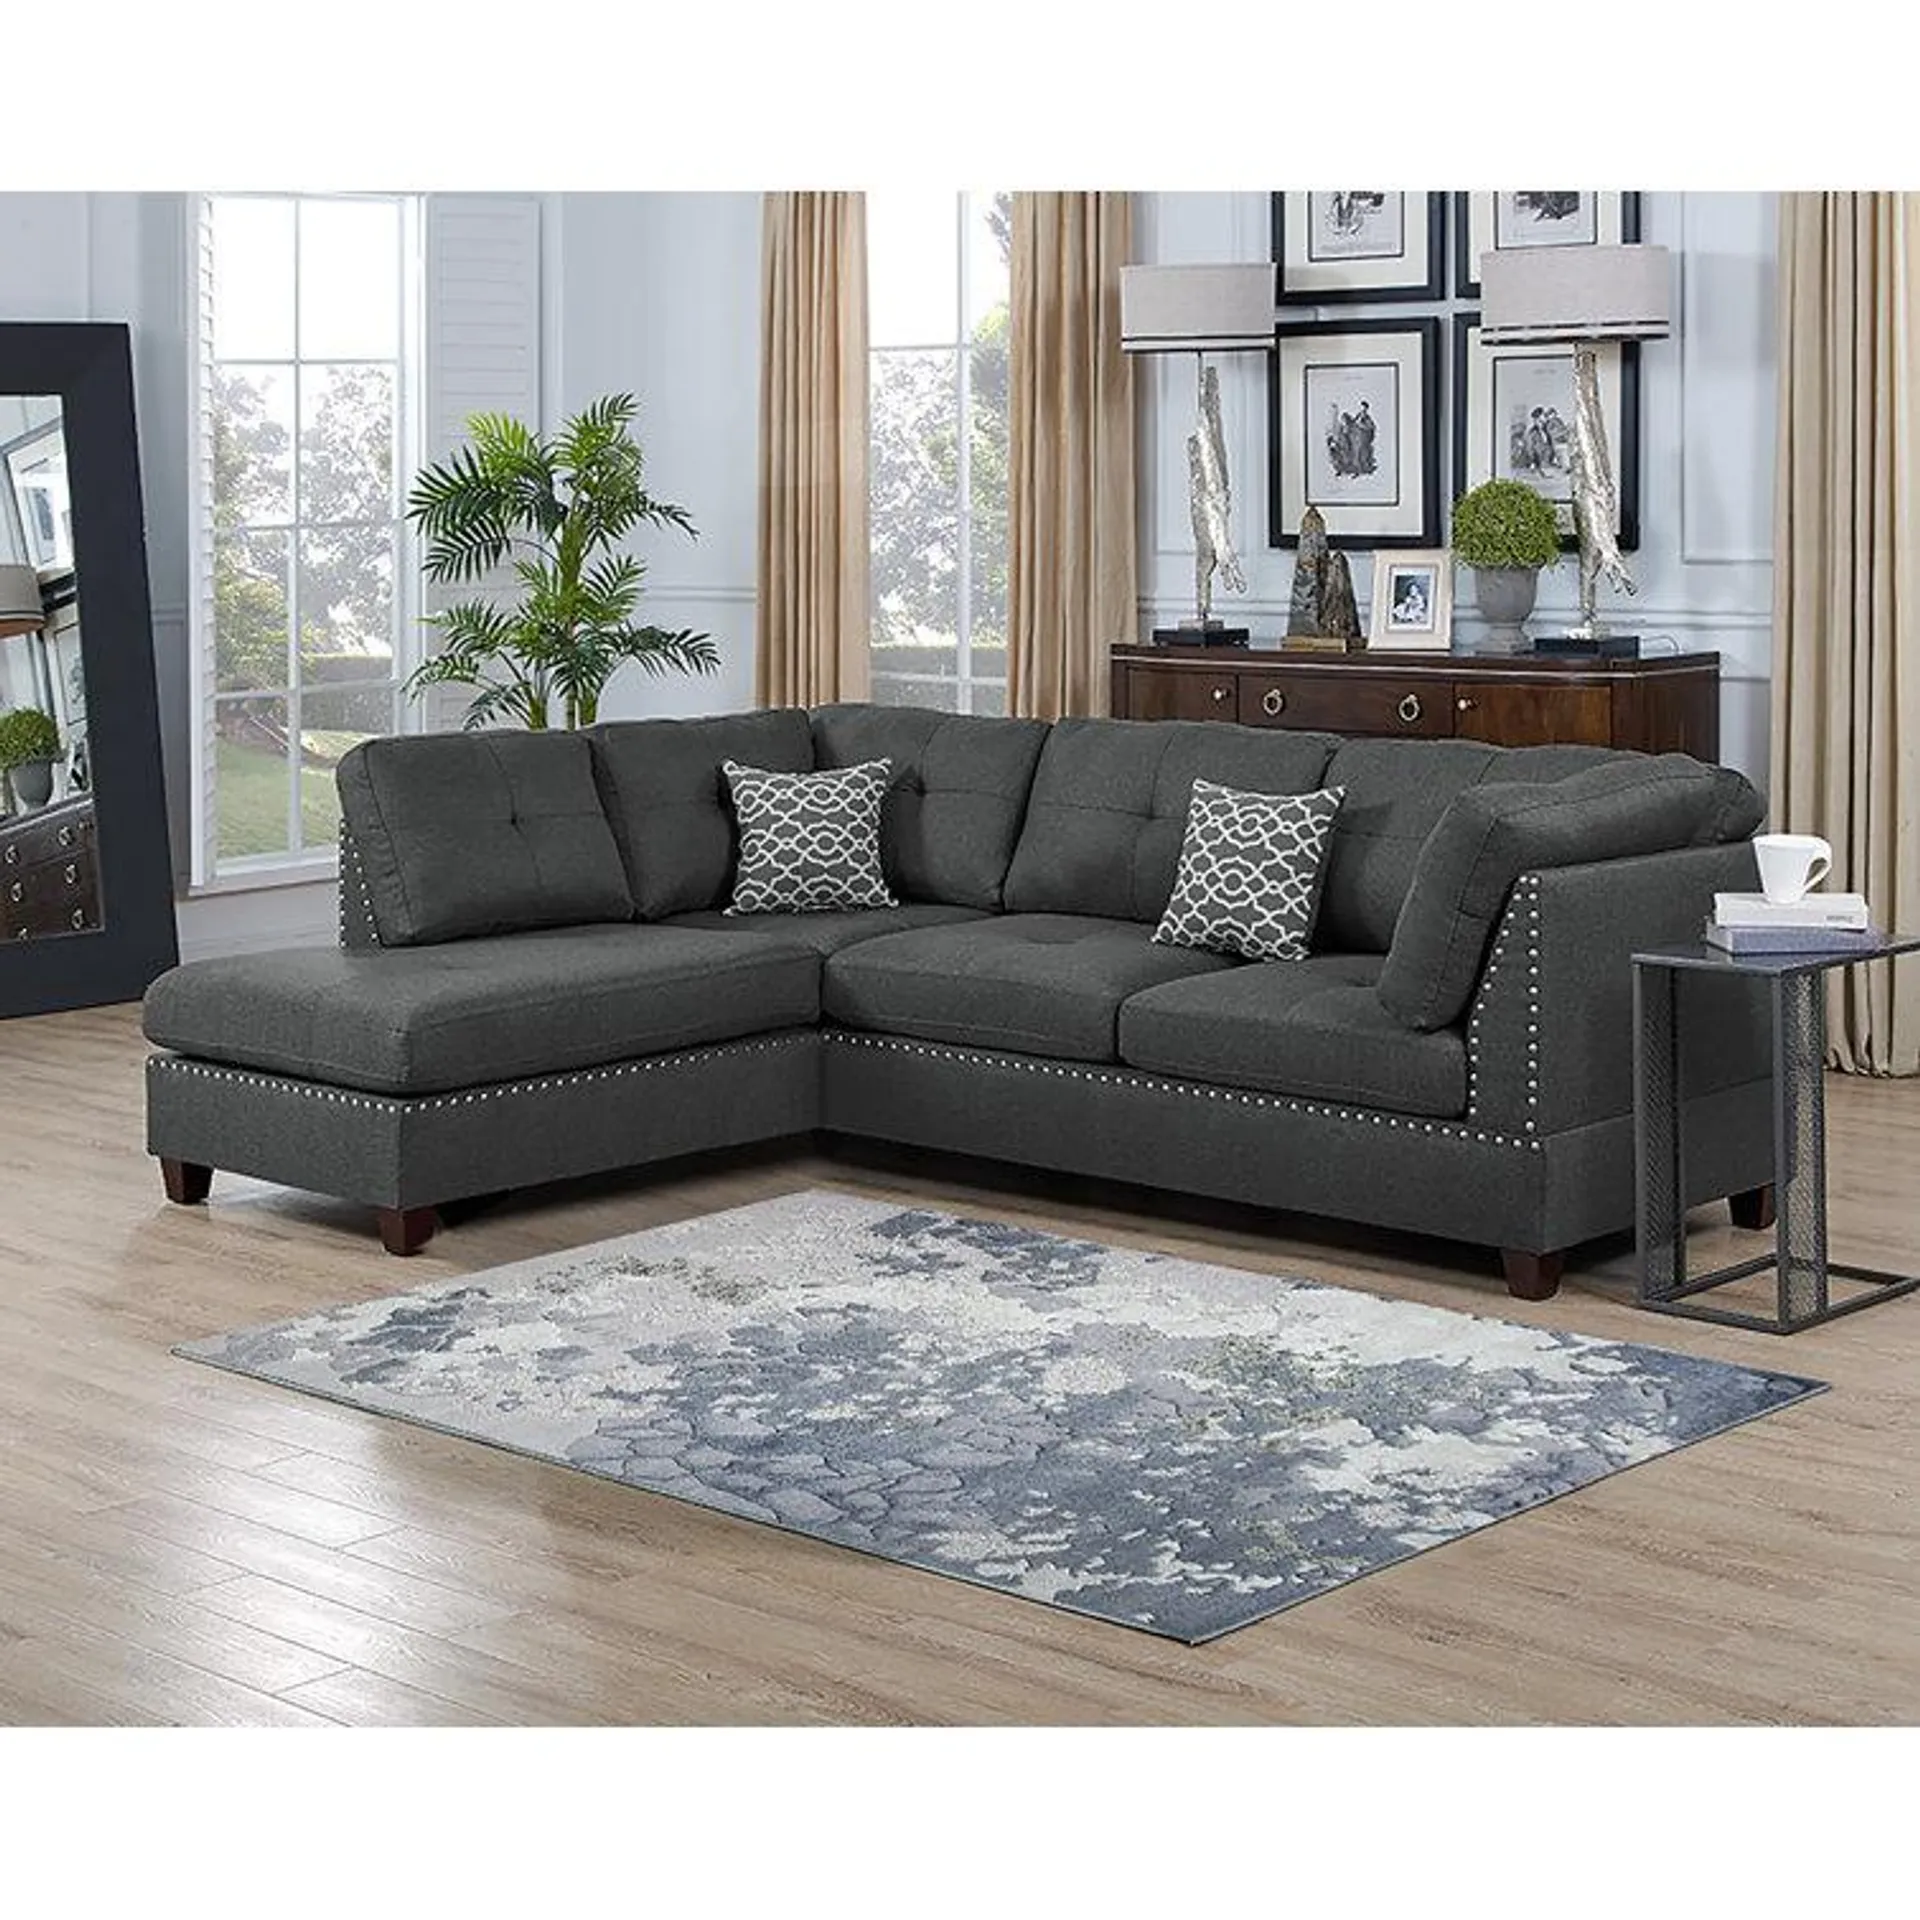 Sunnydale 2 - Piece Upholstered Sectional